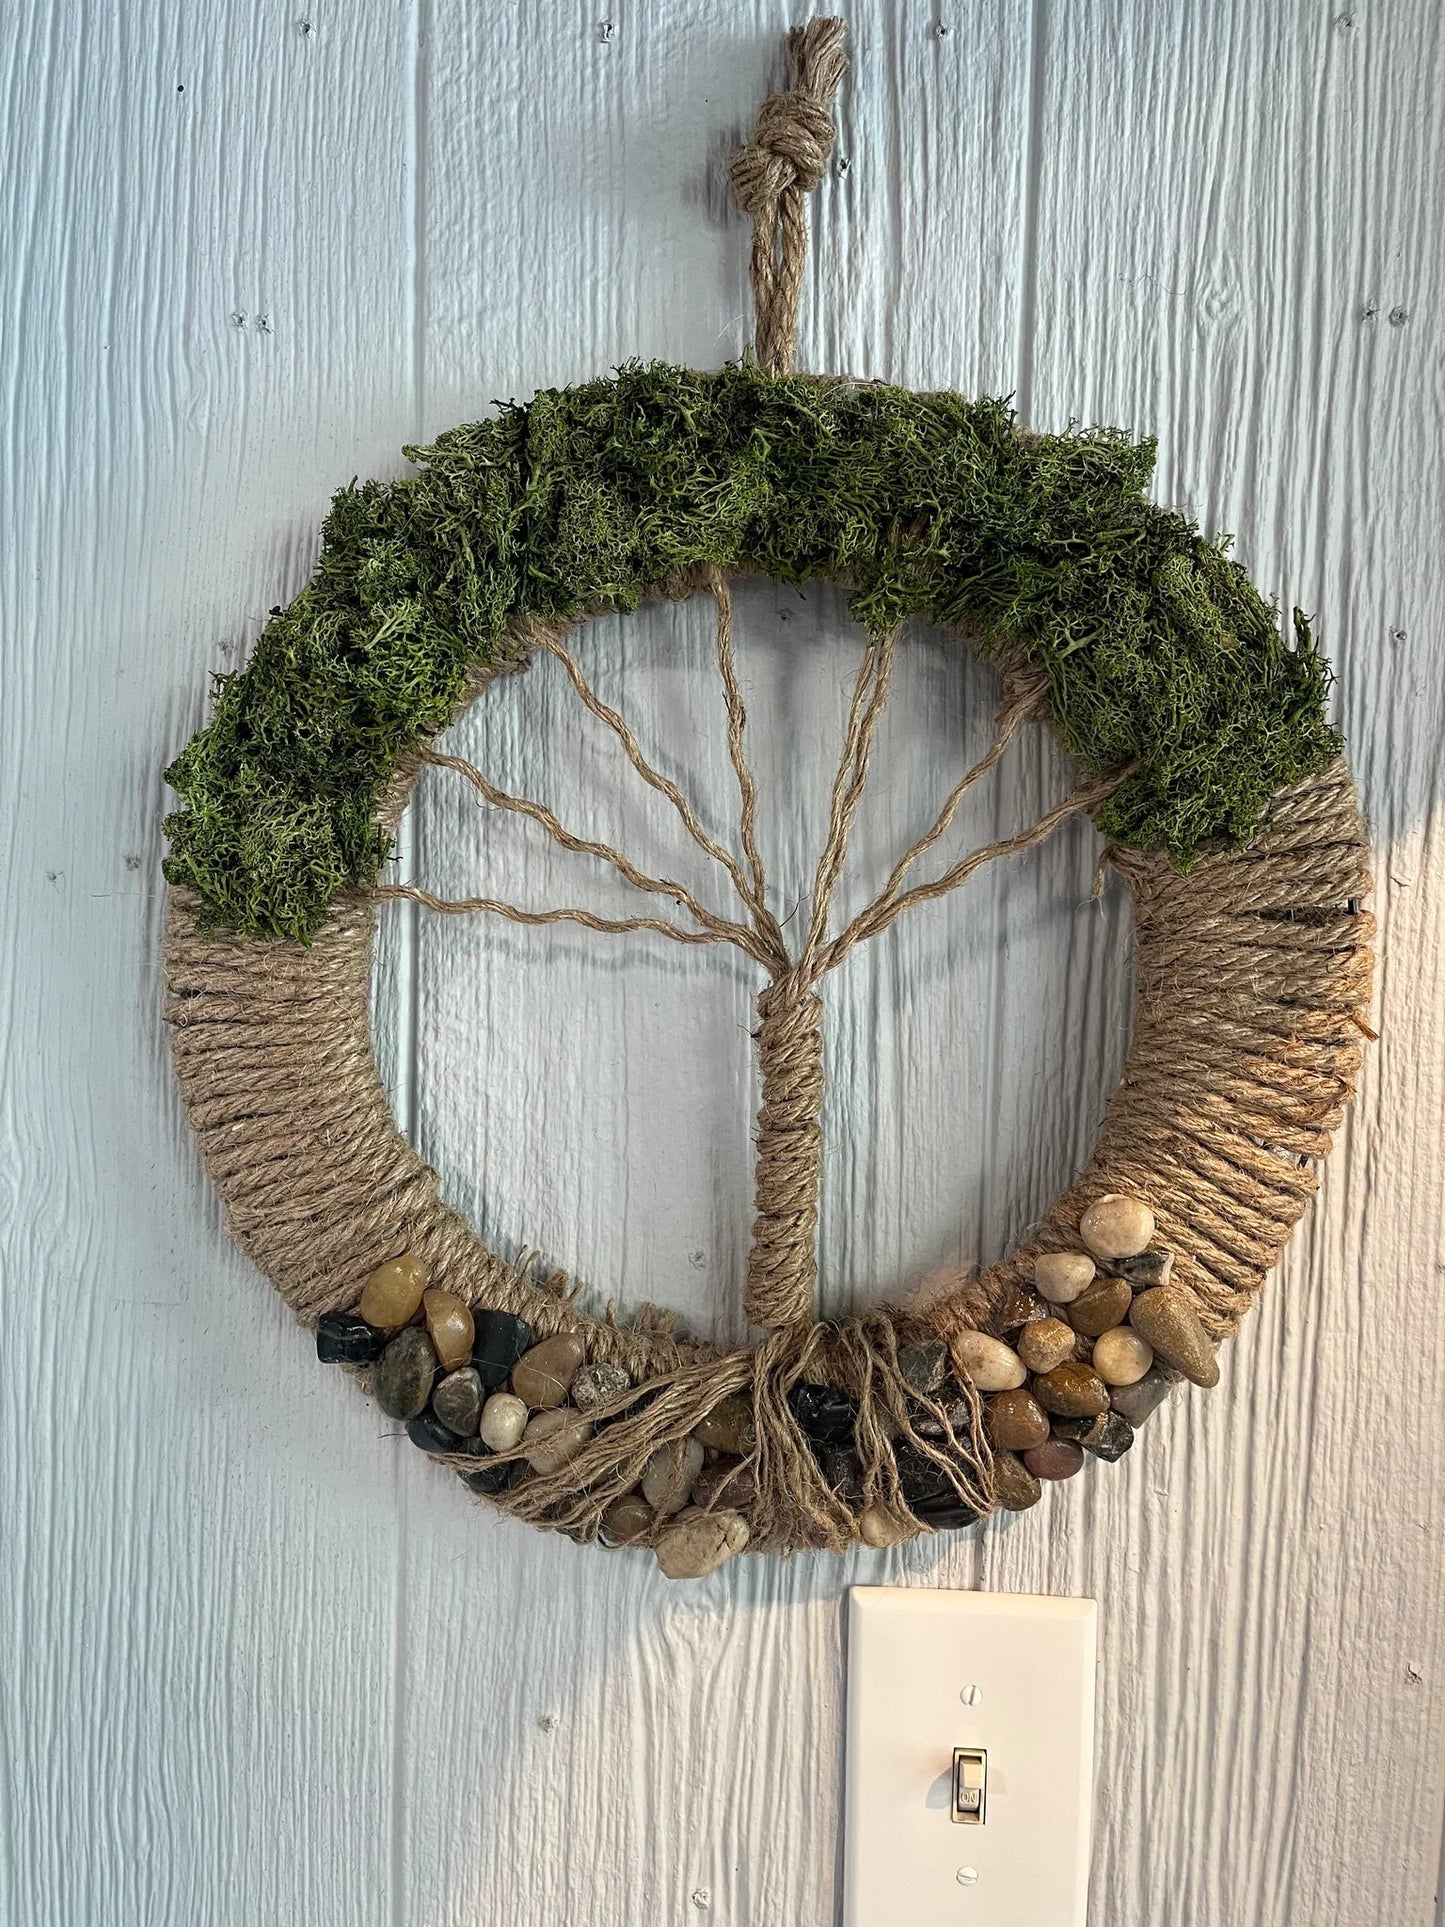 04/21/24 Tree of Life Wreath Workshop at Lincoln Social Food Market 1pm